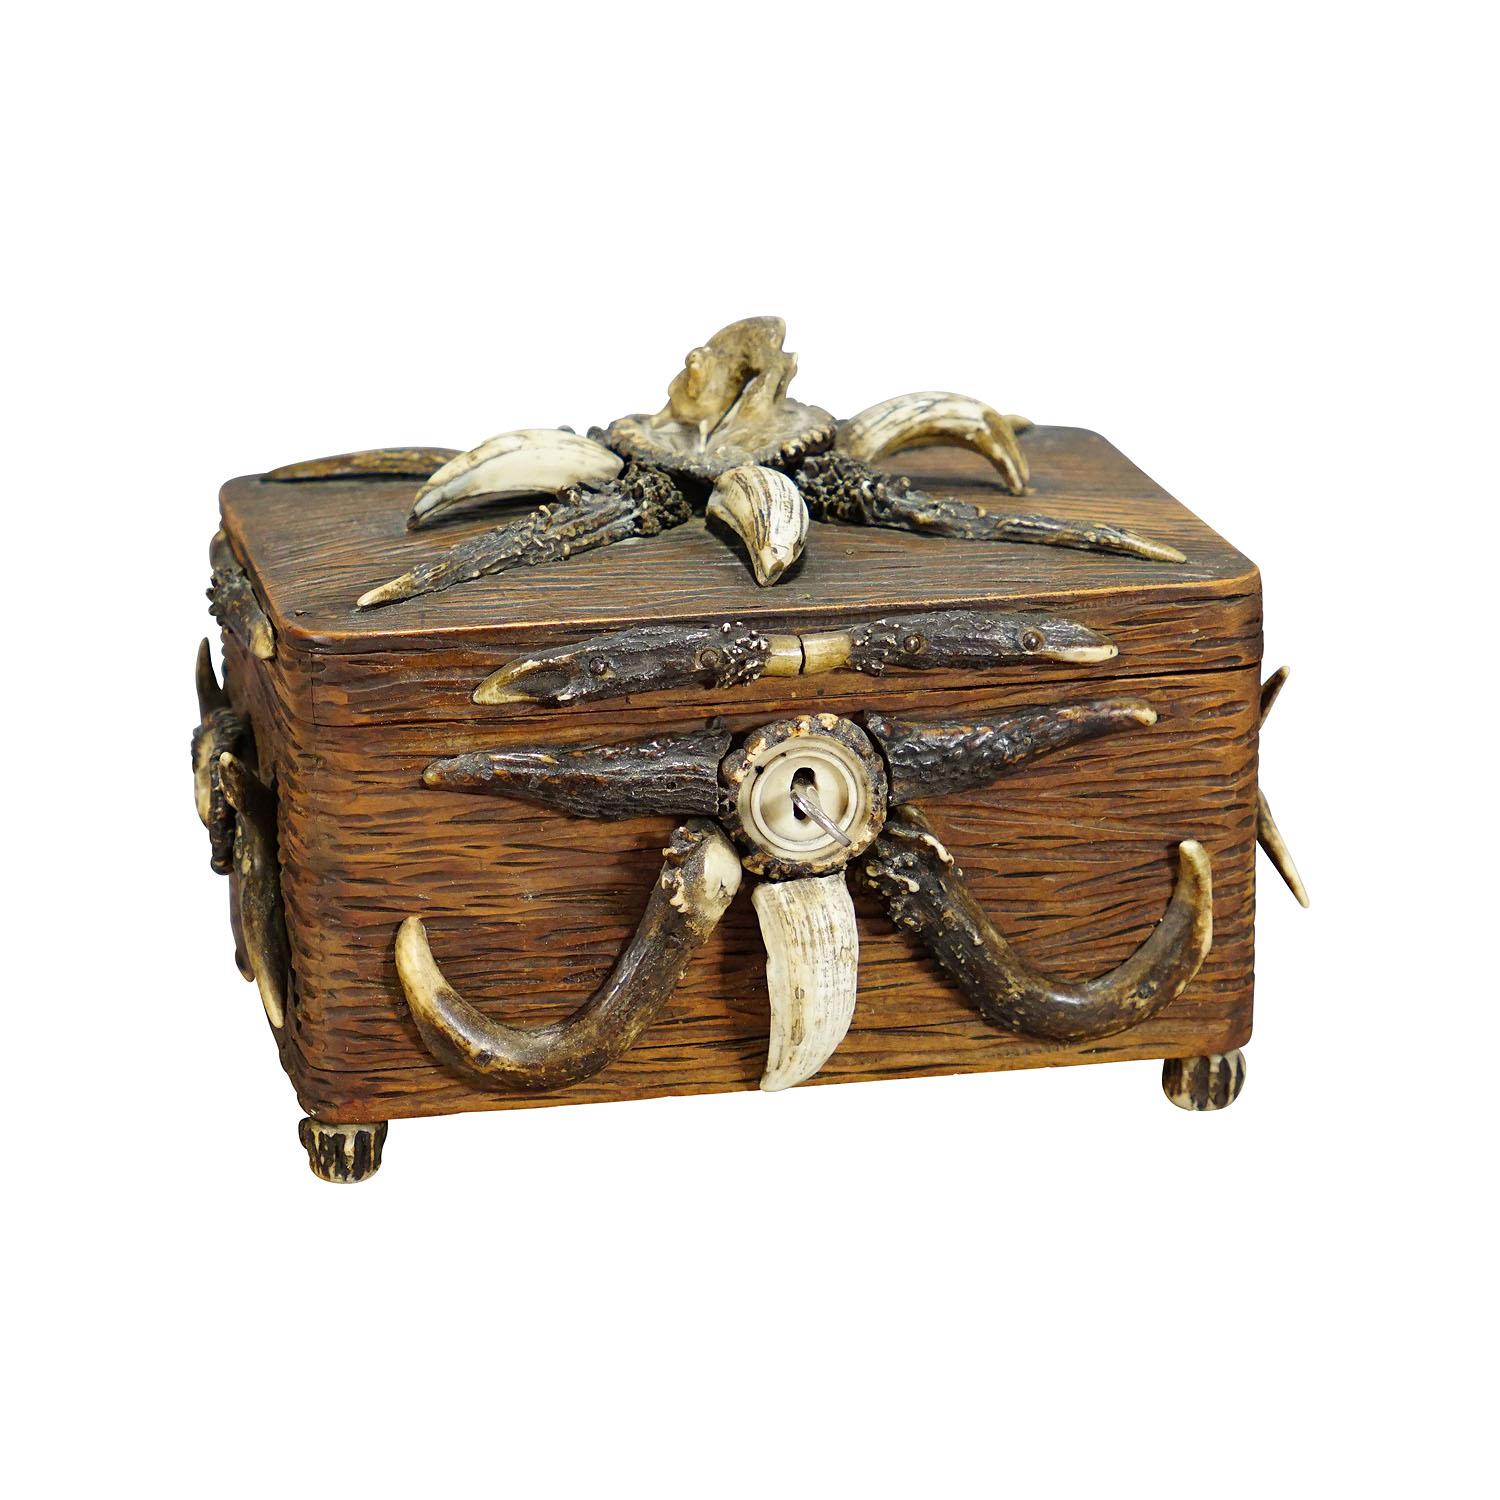 Wooden Black Forest casket with antlers decoration circa 1900s

A marvelous rustic wooden casket or cigar box. It is made of handcarved pine wood panels, decorated with several deer antler pieces and wild boar tusks, on the lid with fine carved